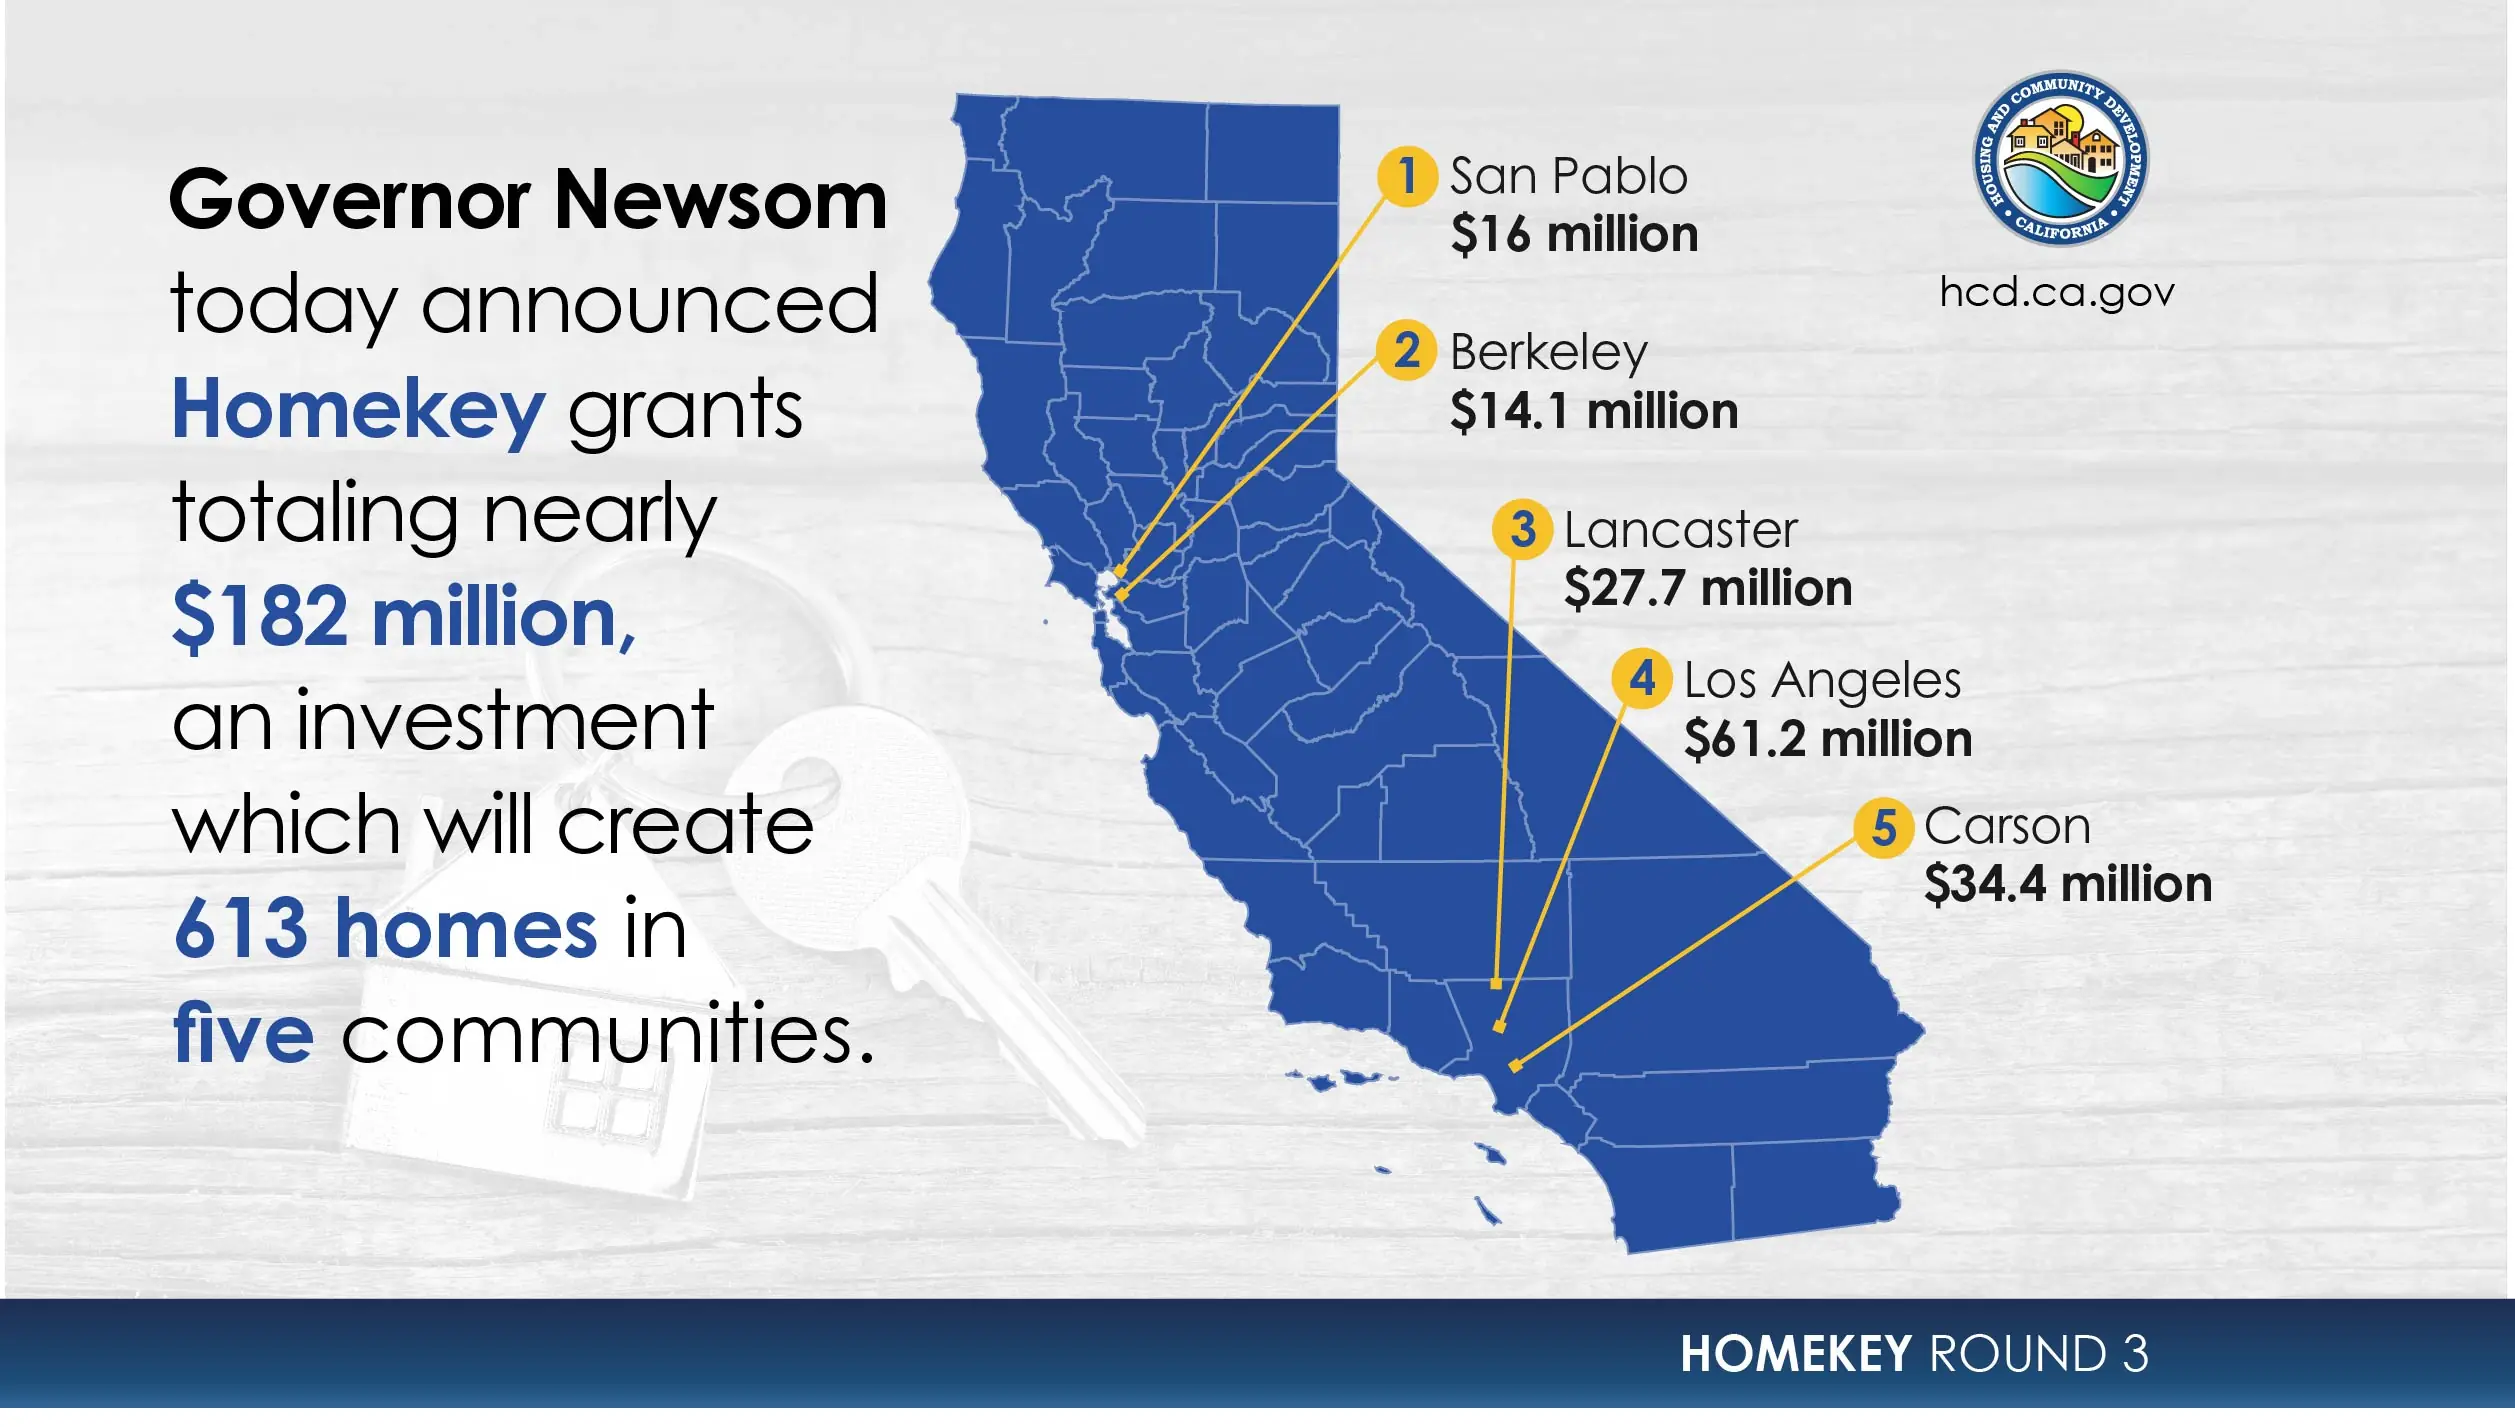 Map of California with awarded communities pinpointed. San Pablo, 16 million; Berkeley, 14.1 million; Lancaster, 27.7 million; Los angeles 61.2 million; carson, 34.4 million. Tagline reads: Governor Newsom today announced homekey grants totaling nearly 182 million, an investment which will create 613 homes in five communities.